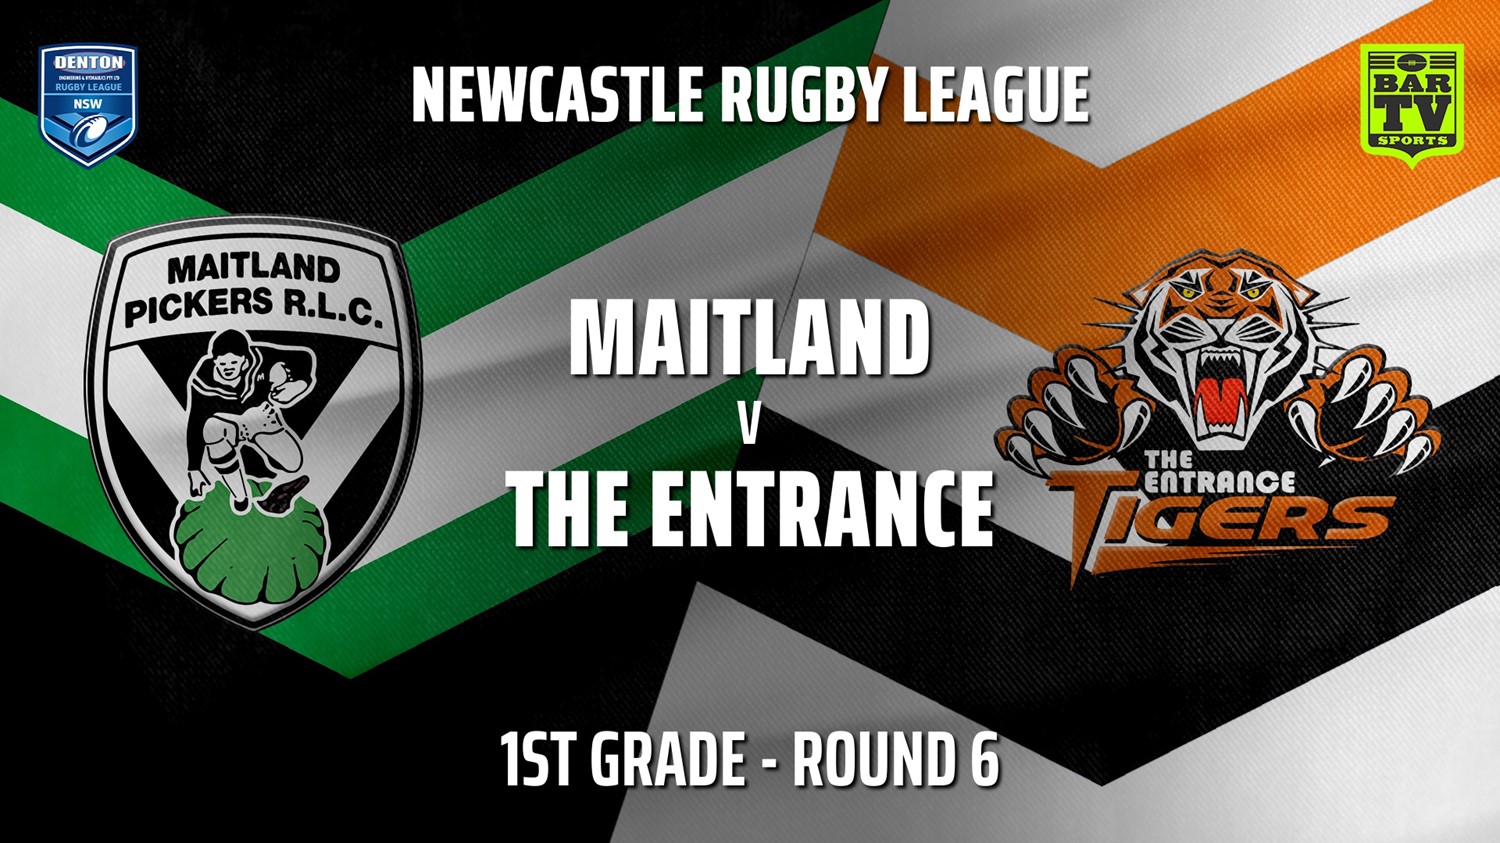 210429-Newcastle Rugby League Round 6 - 1st Grade - Maitland Pickers v The Entrance Tigers Slate Image